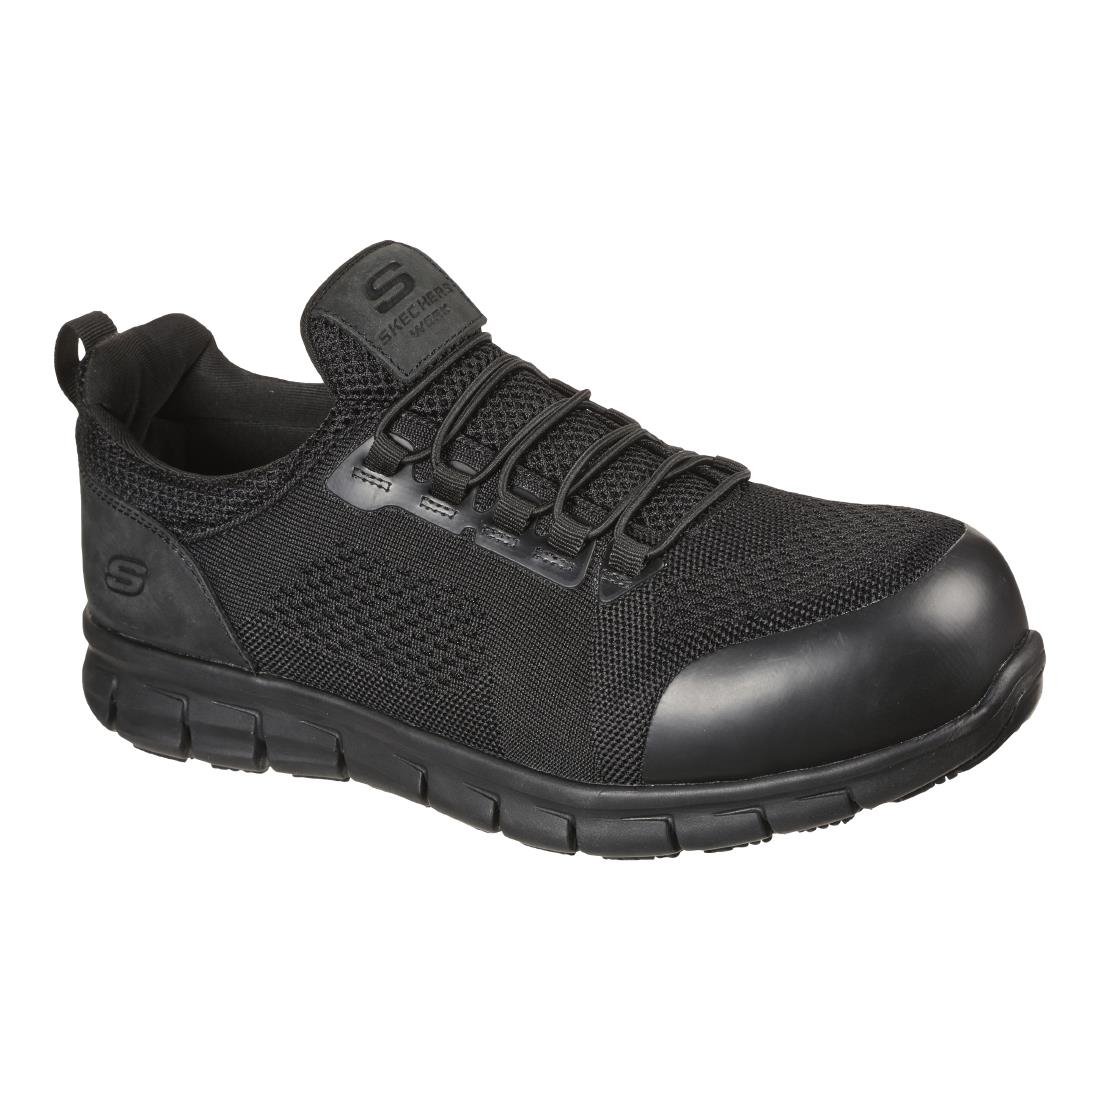 BB675-45 Skechers Safety Shoe with Steel Toe Cap Size 45 JD Catering Equipment Solutions Ltd